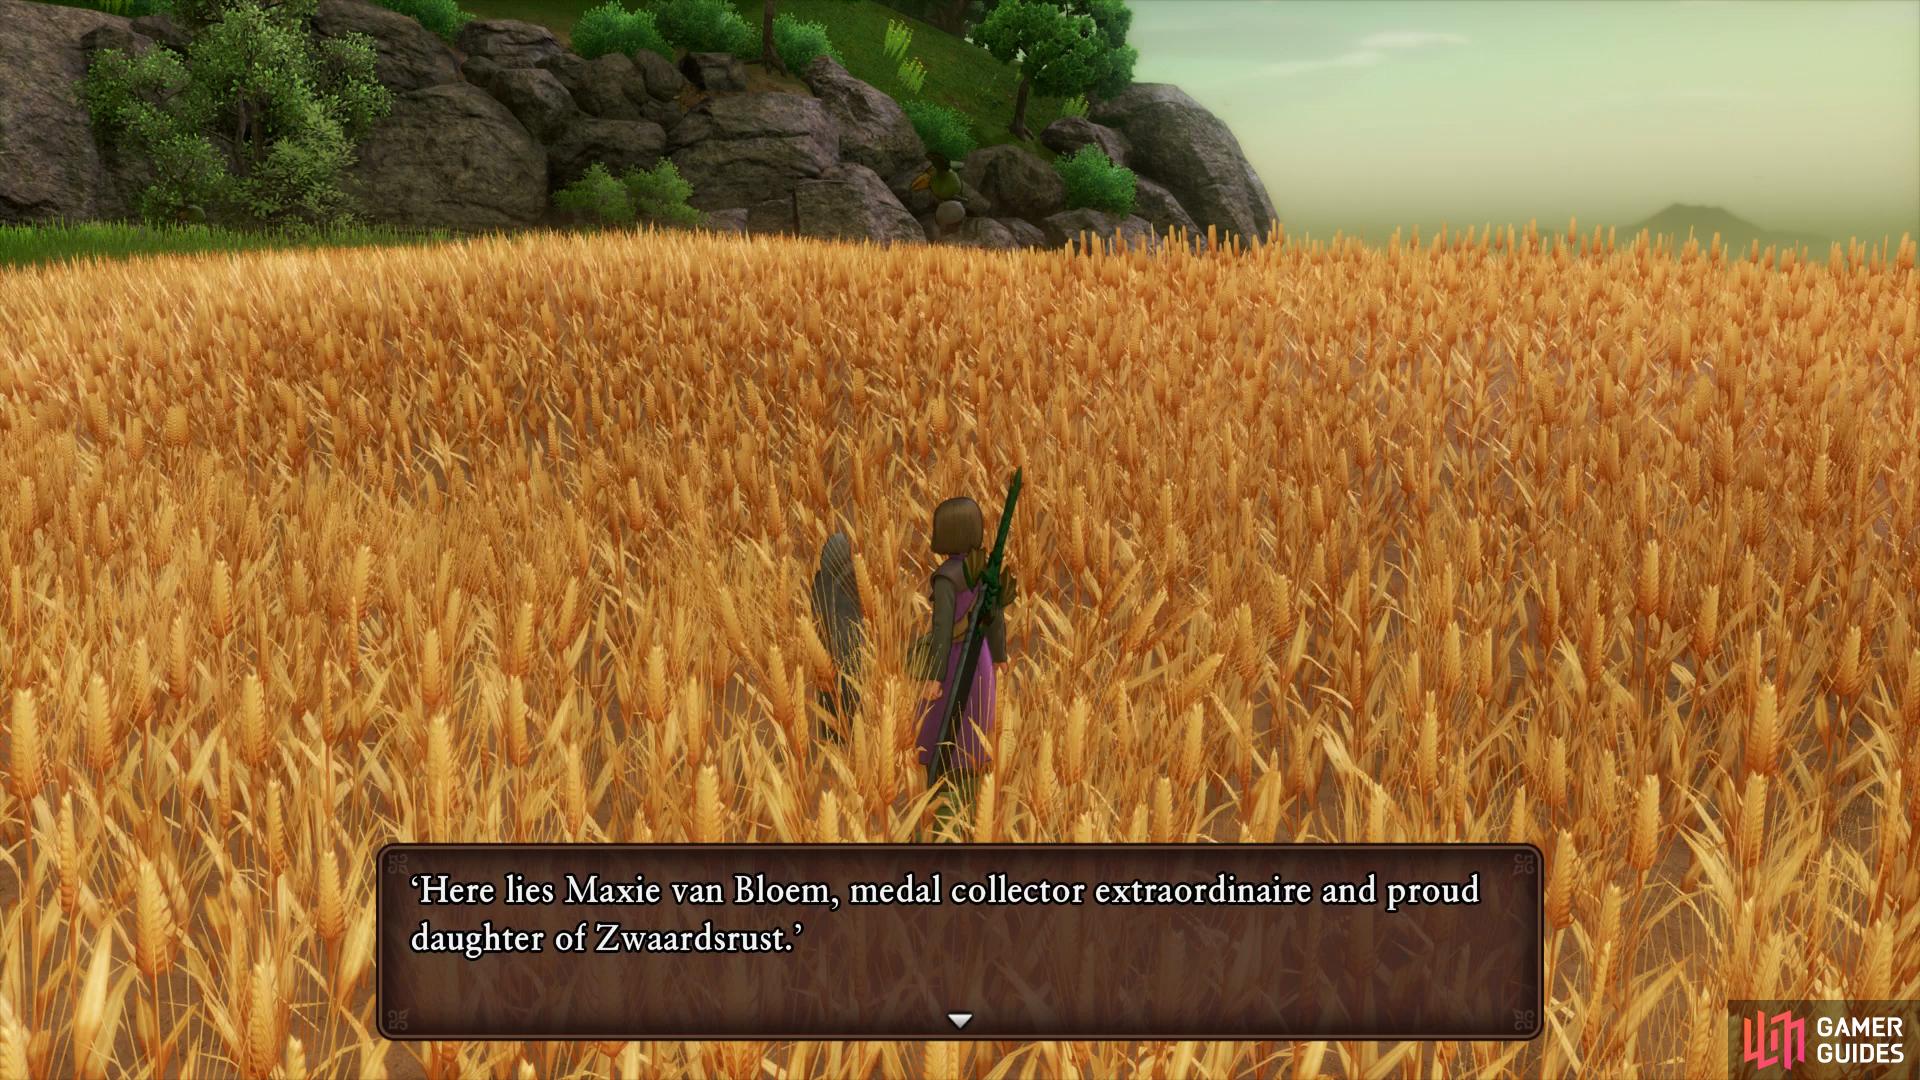 You'll find a gravestone in the fields to the east of the Warrior's Rest Inn